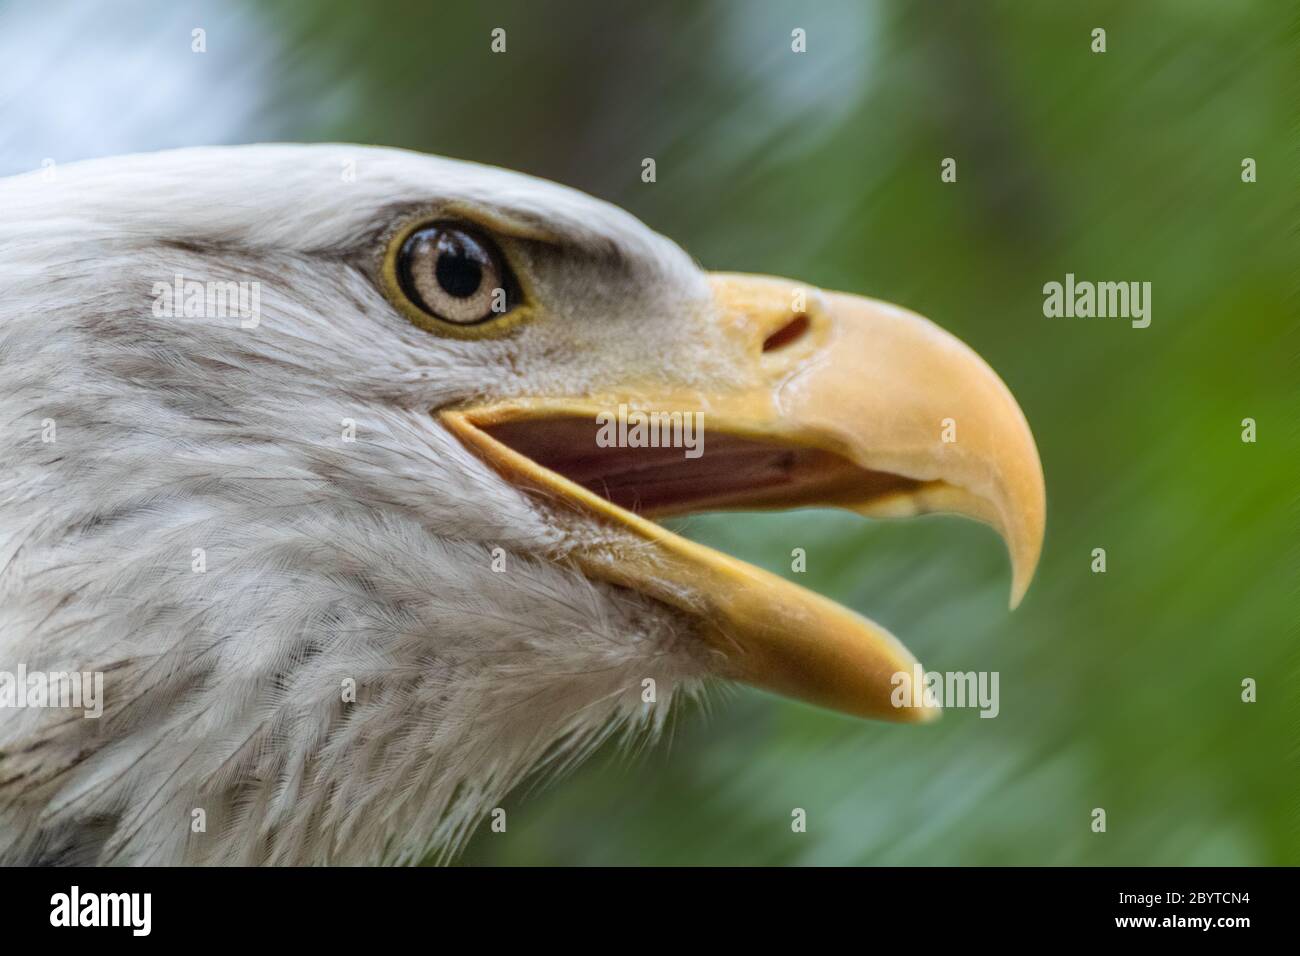 Portrait of a bald eagle head close-up on blurry background in movement. Powerful bird in wild life Stock Photo